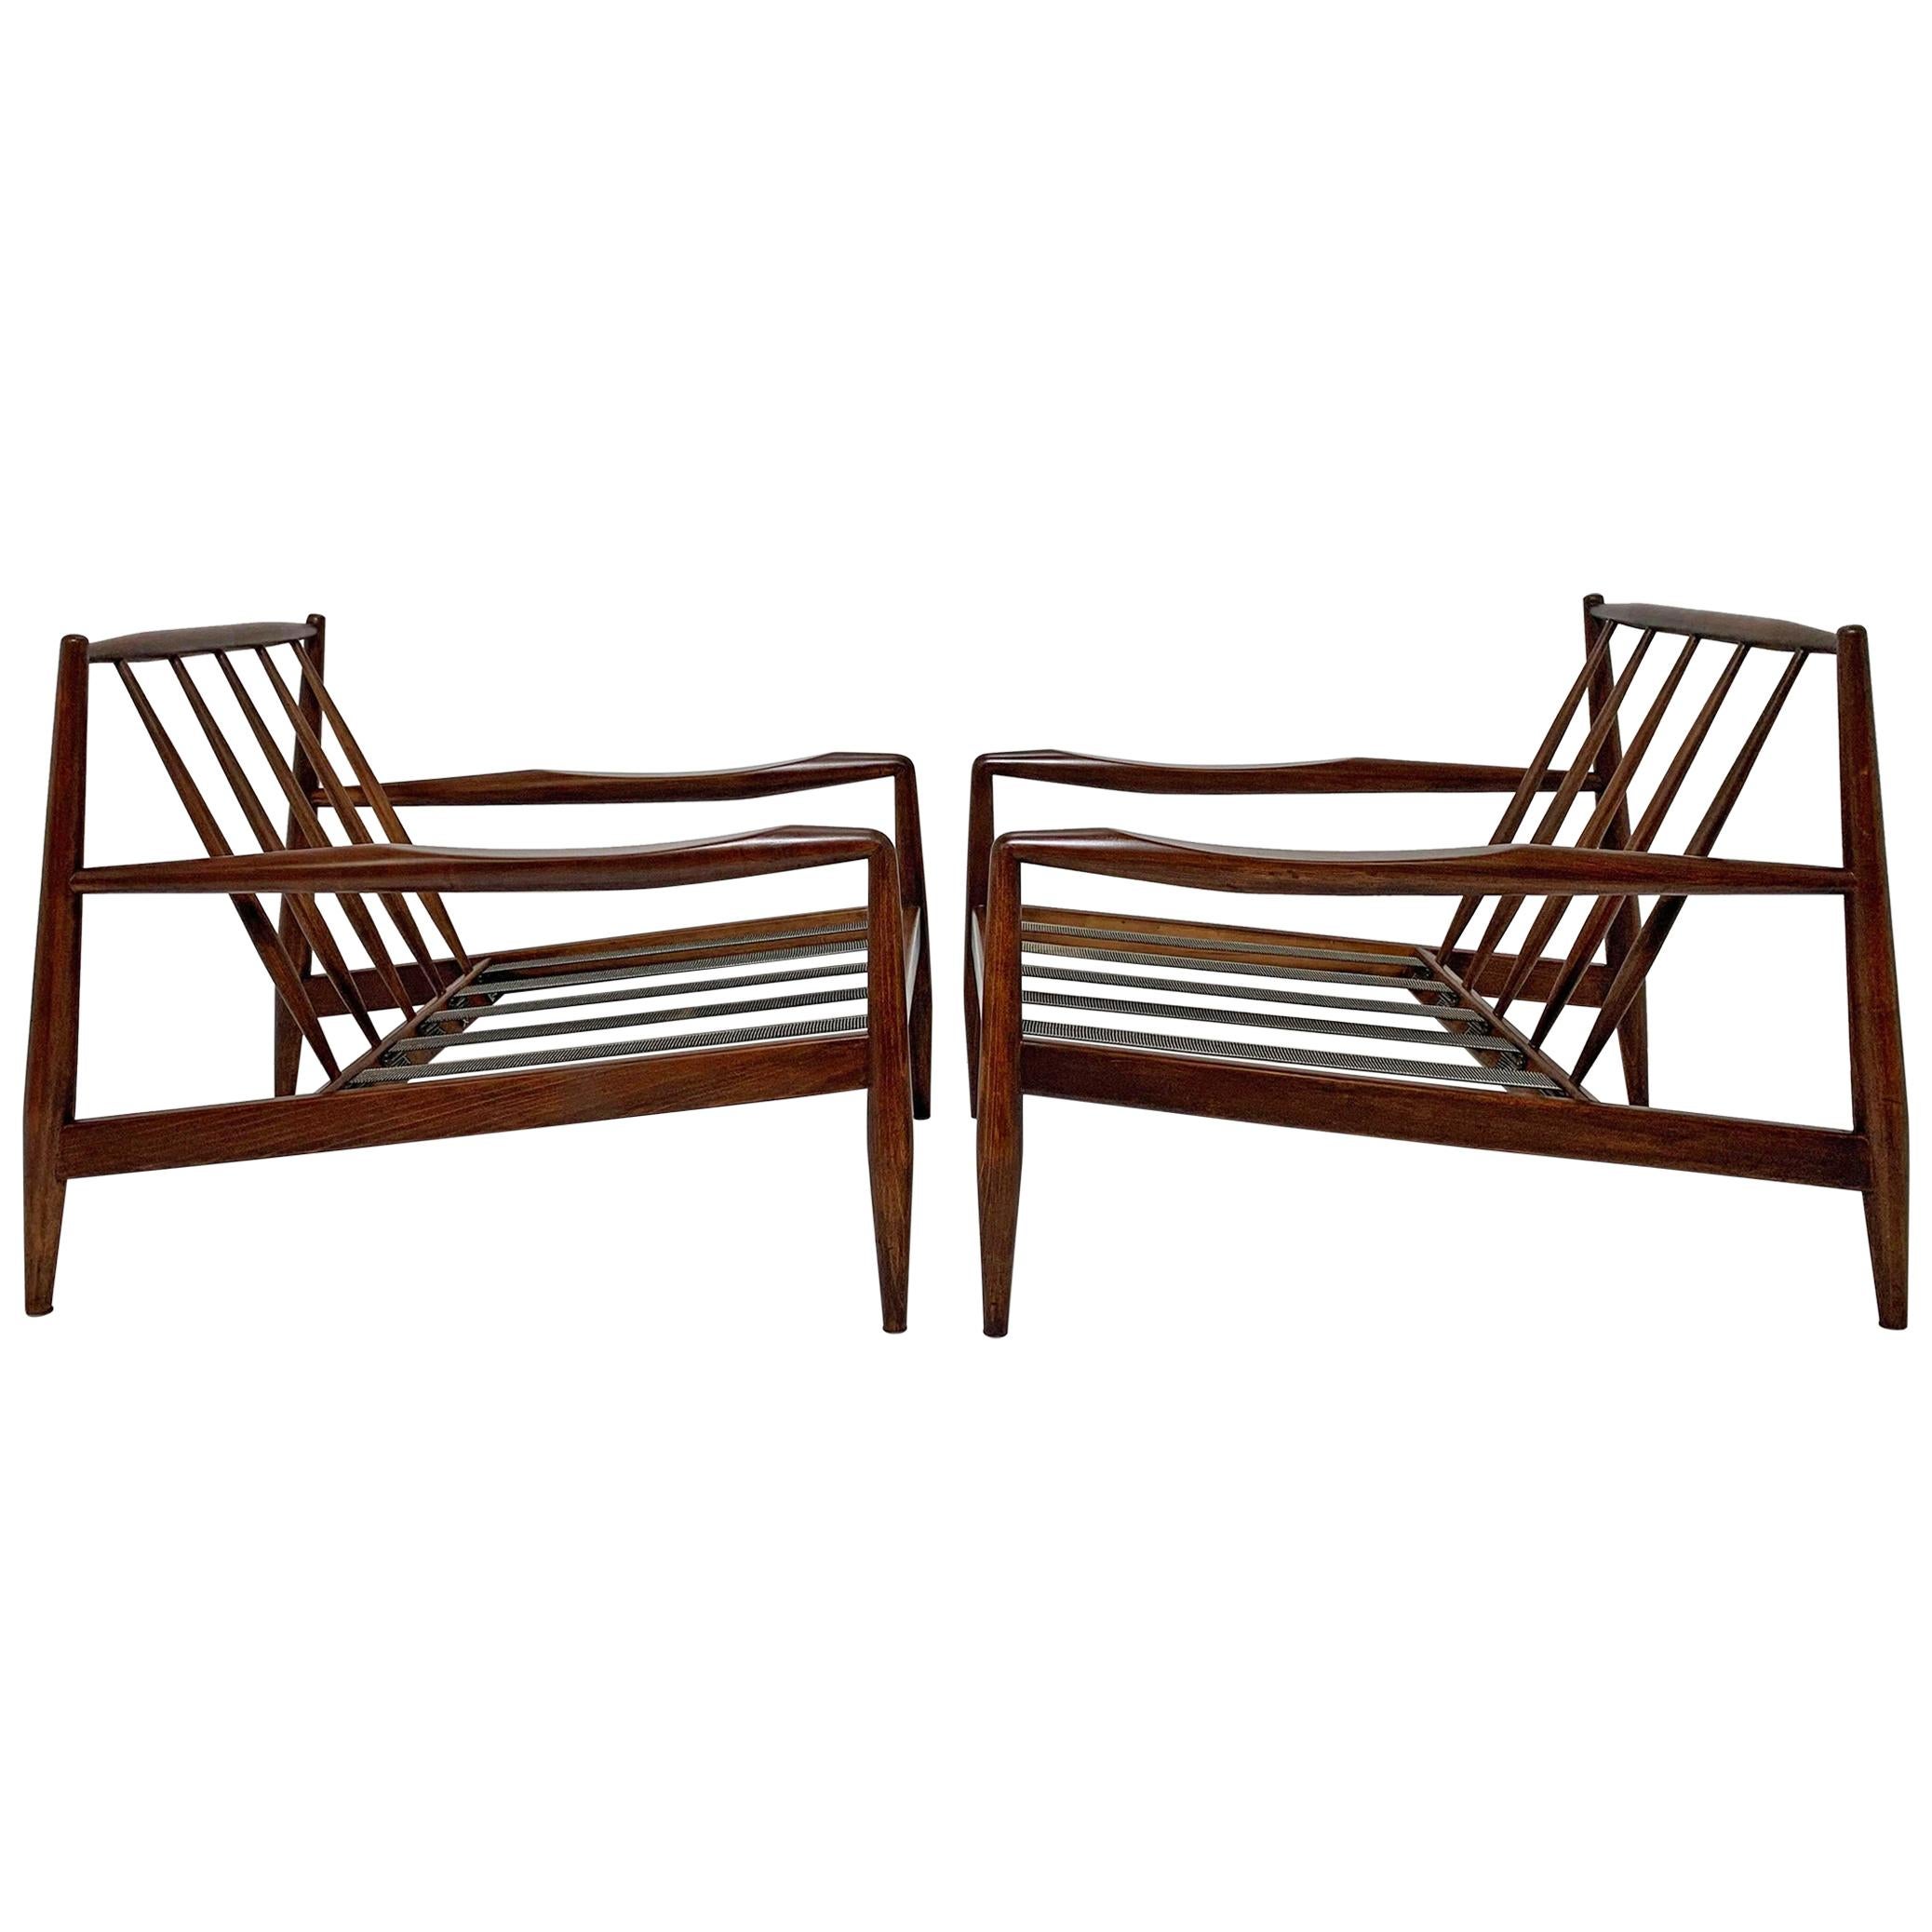 Pair of Adrian Pearsall for Craft Associates Model 834-C Lounge Chairs